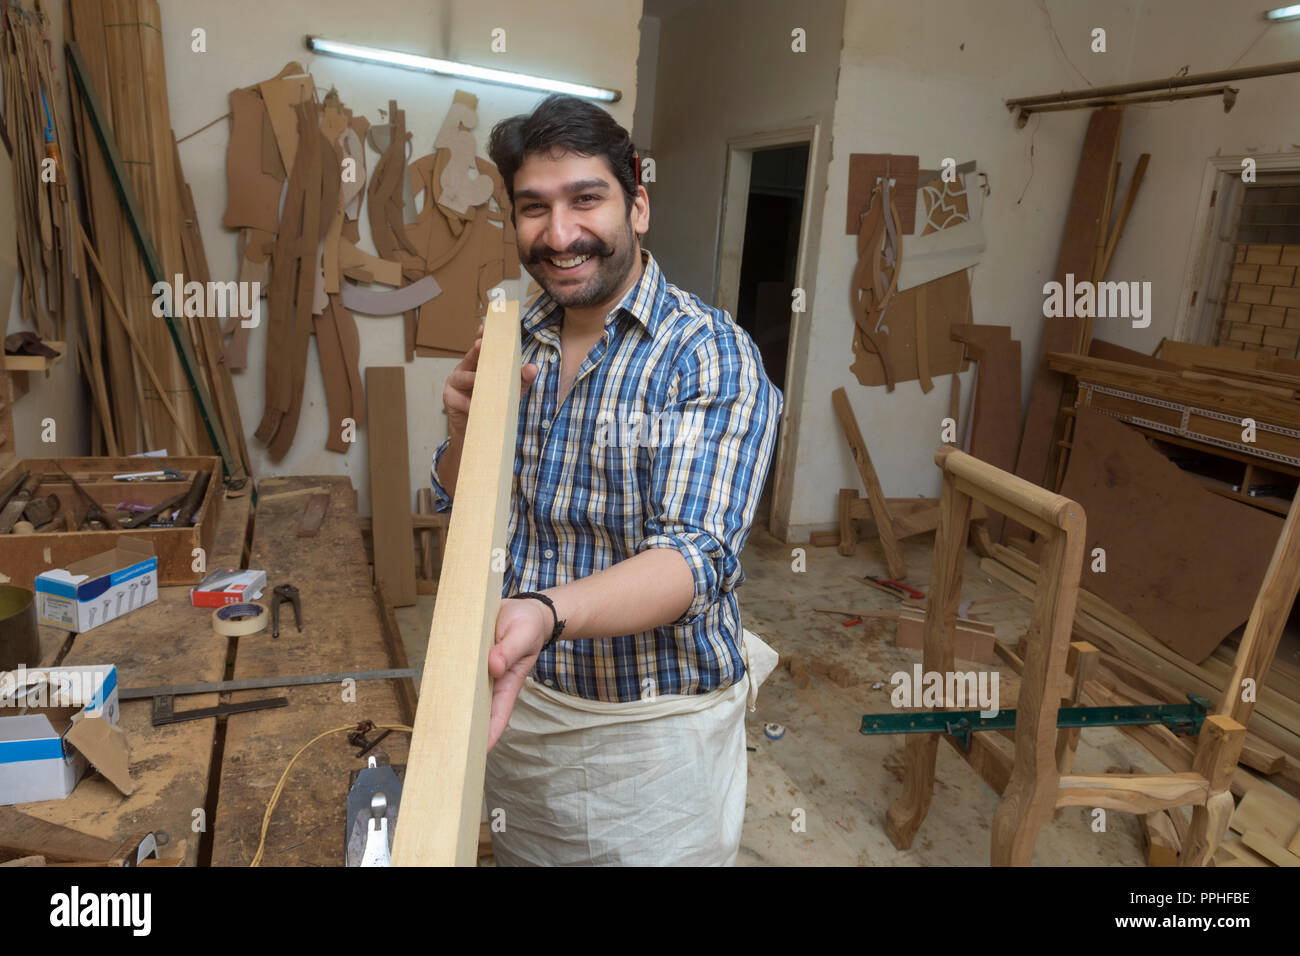 Smiling carpenter in his workshop checking the straightness of a wooden log. Stock Photo